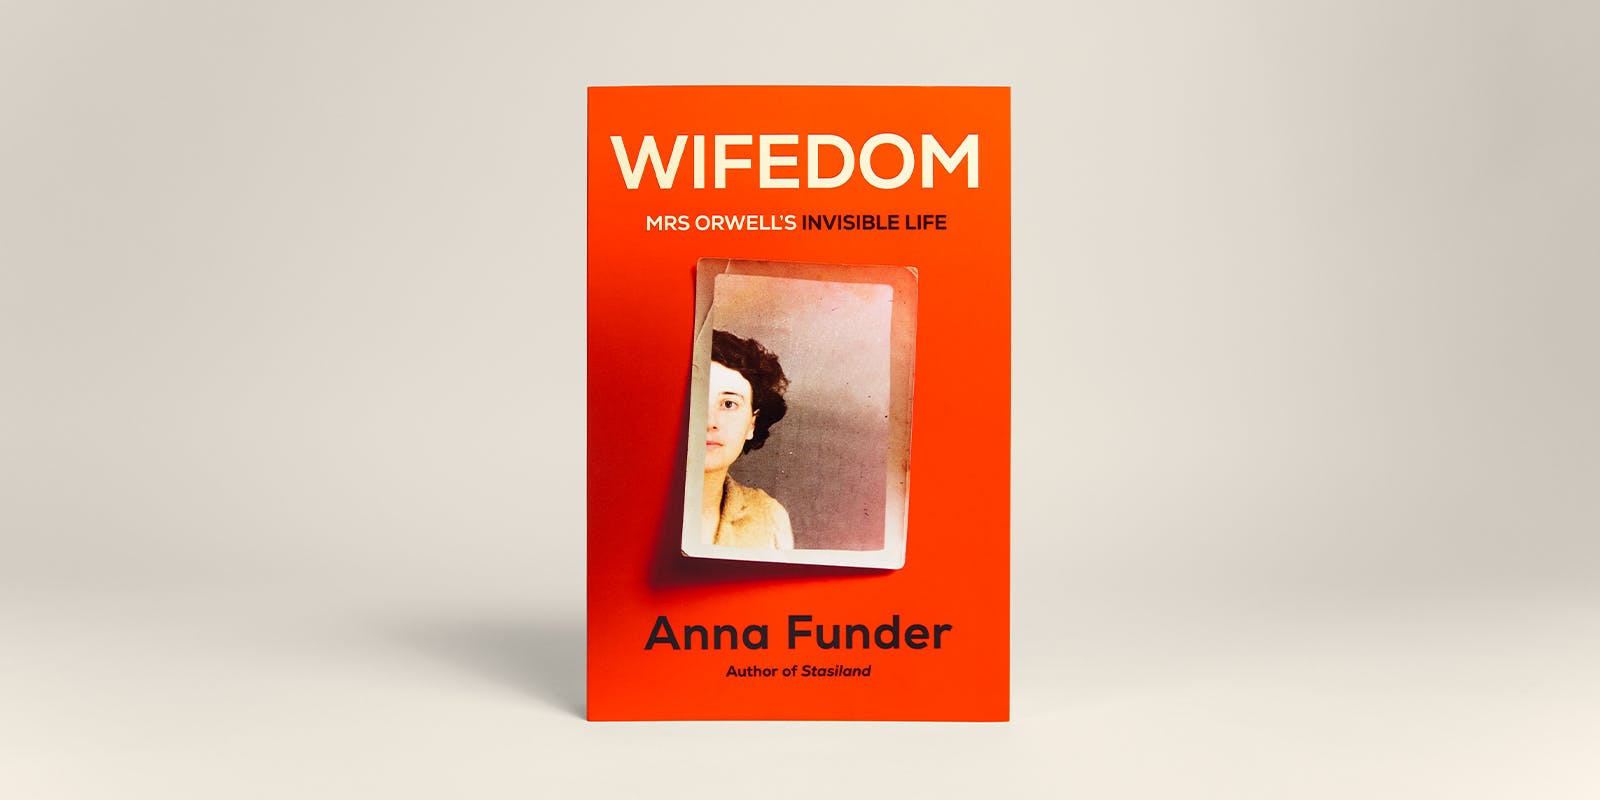 See what reviewers are saying about Wifedom